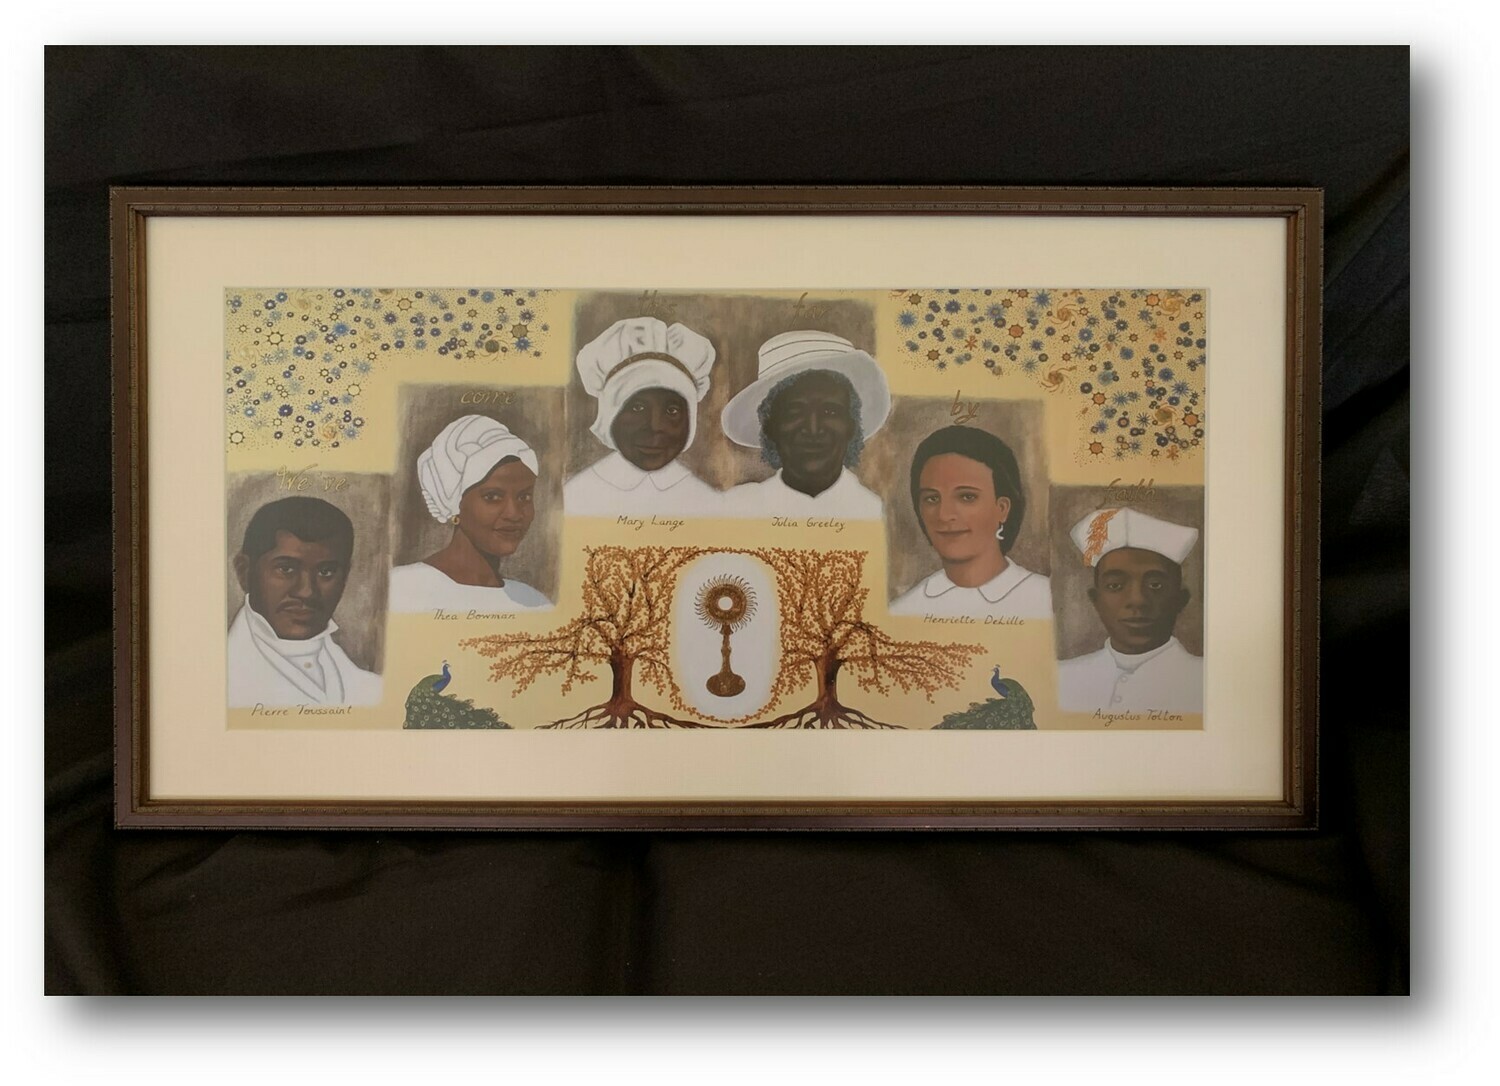 6 African Americans On Their Way to Sainthood by Br. Leo Franca, O.S.B